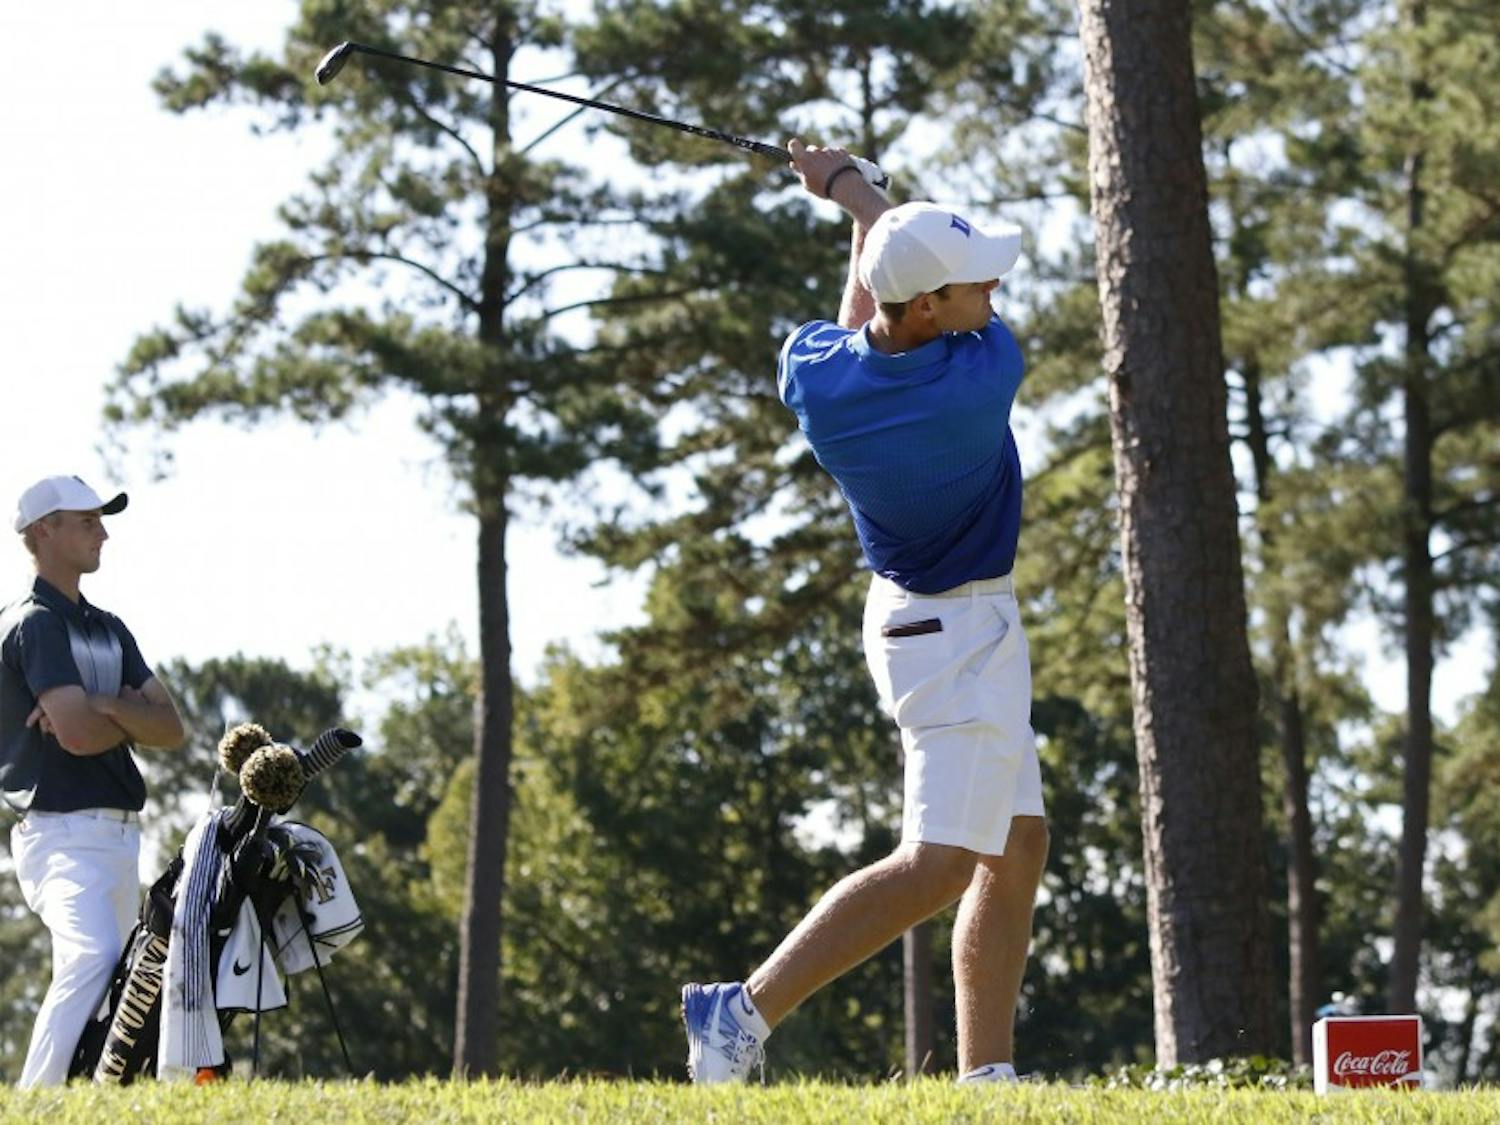 Sophomore Adam Wood finished second overall at seven-under par at the Rod Myers Invitational this weekend.